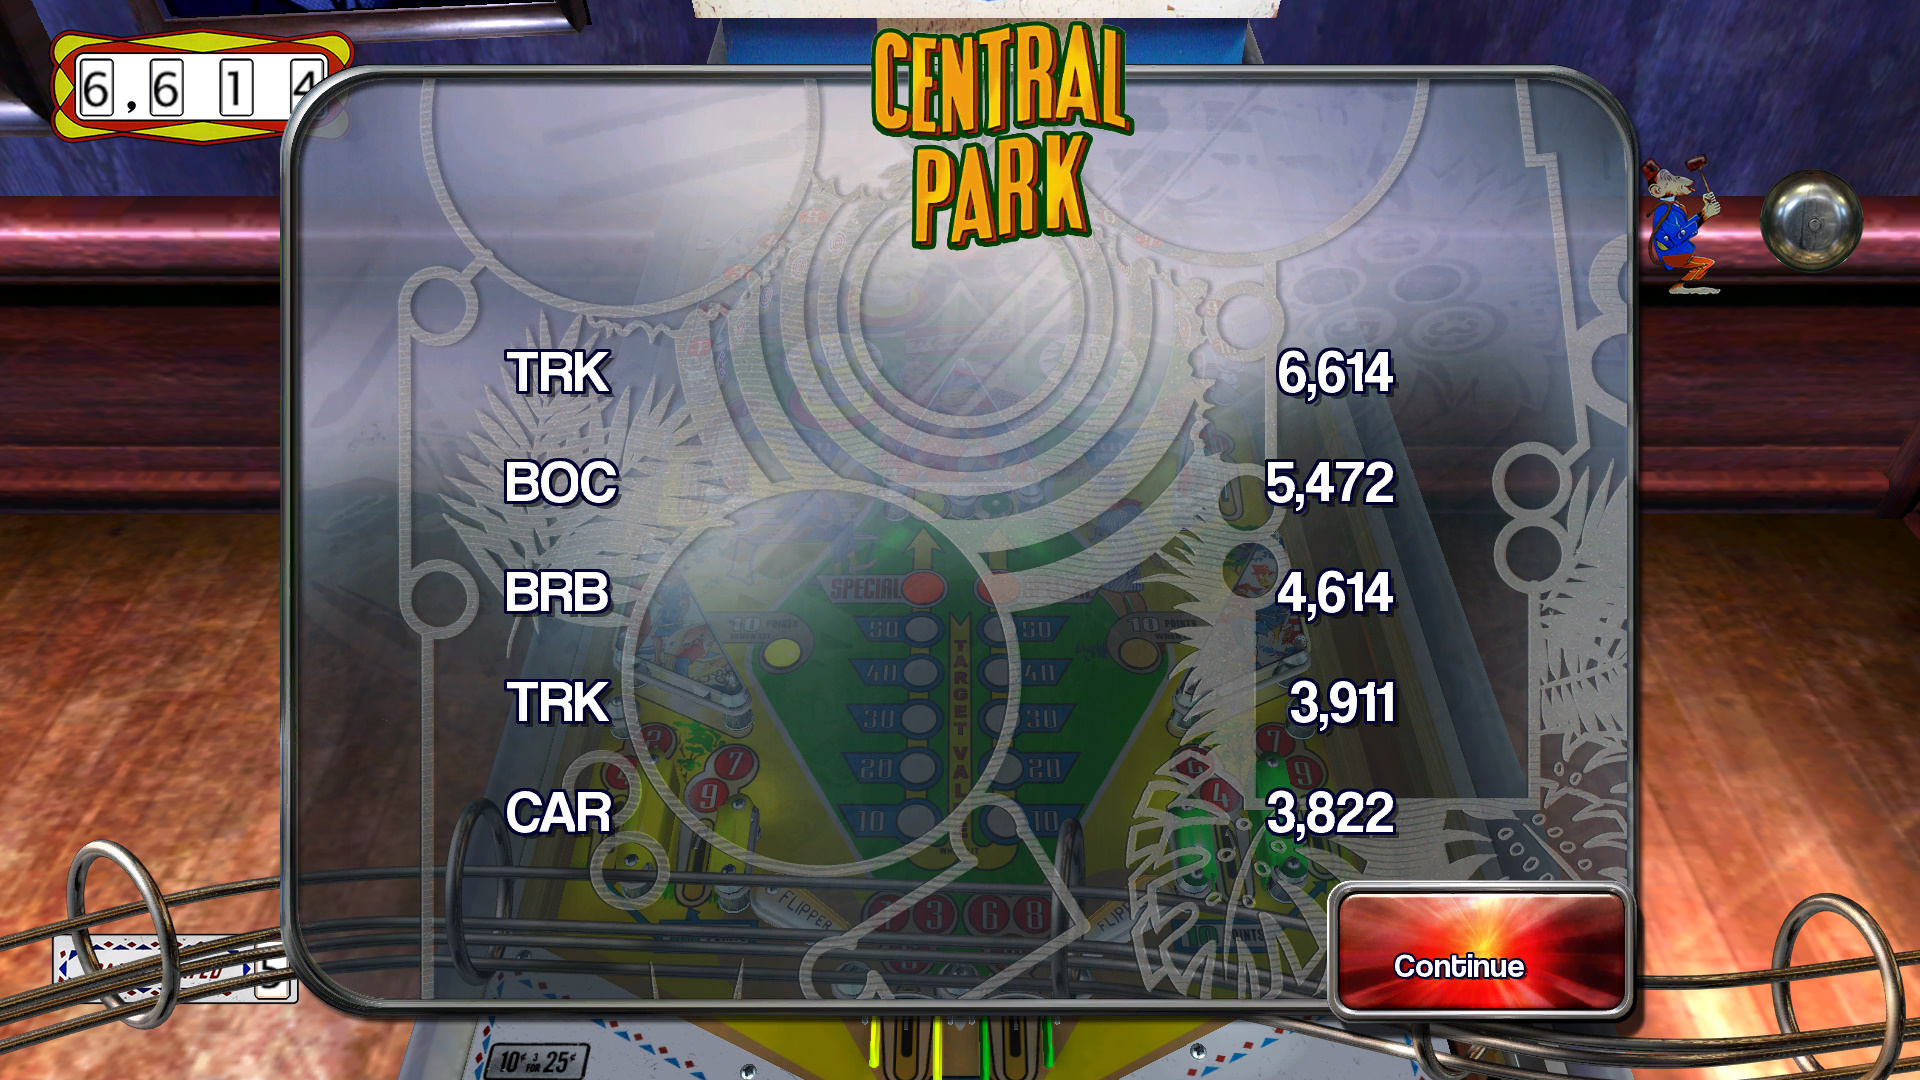 TheTrickster: Pinball Arcade: Central Park (PC) 6,614 points on 2015-09-14 07:09:21